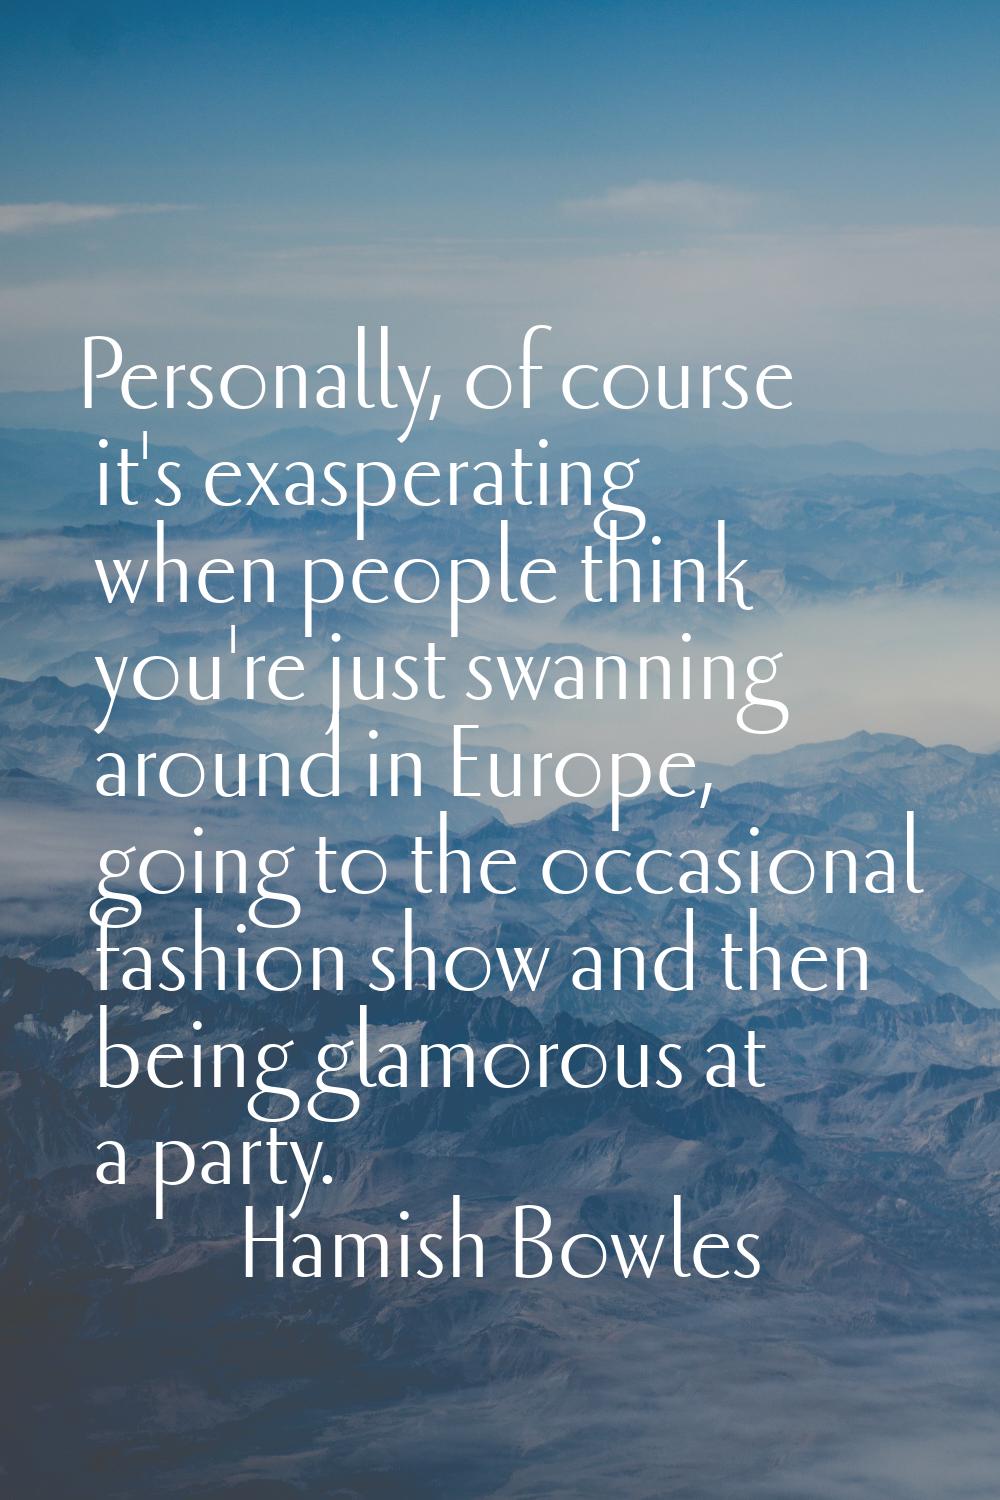 Personally, of course it's exasperating when people think you're just swanning around in Europe, go